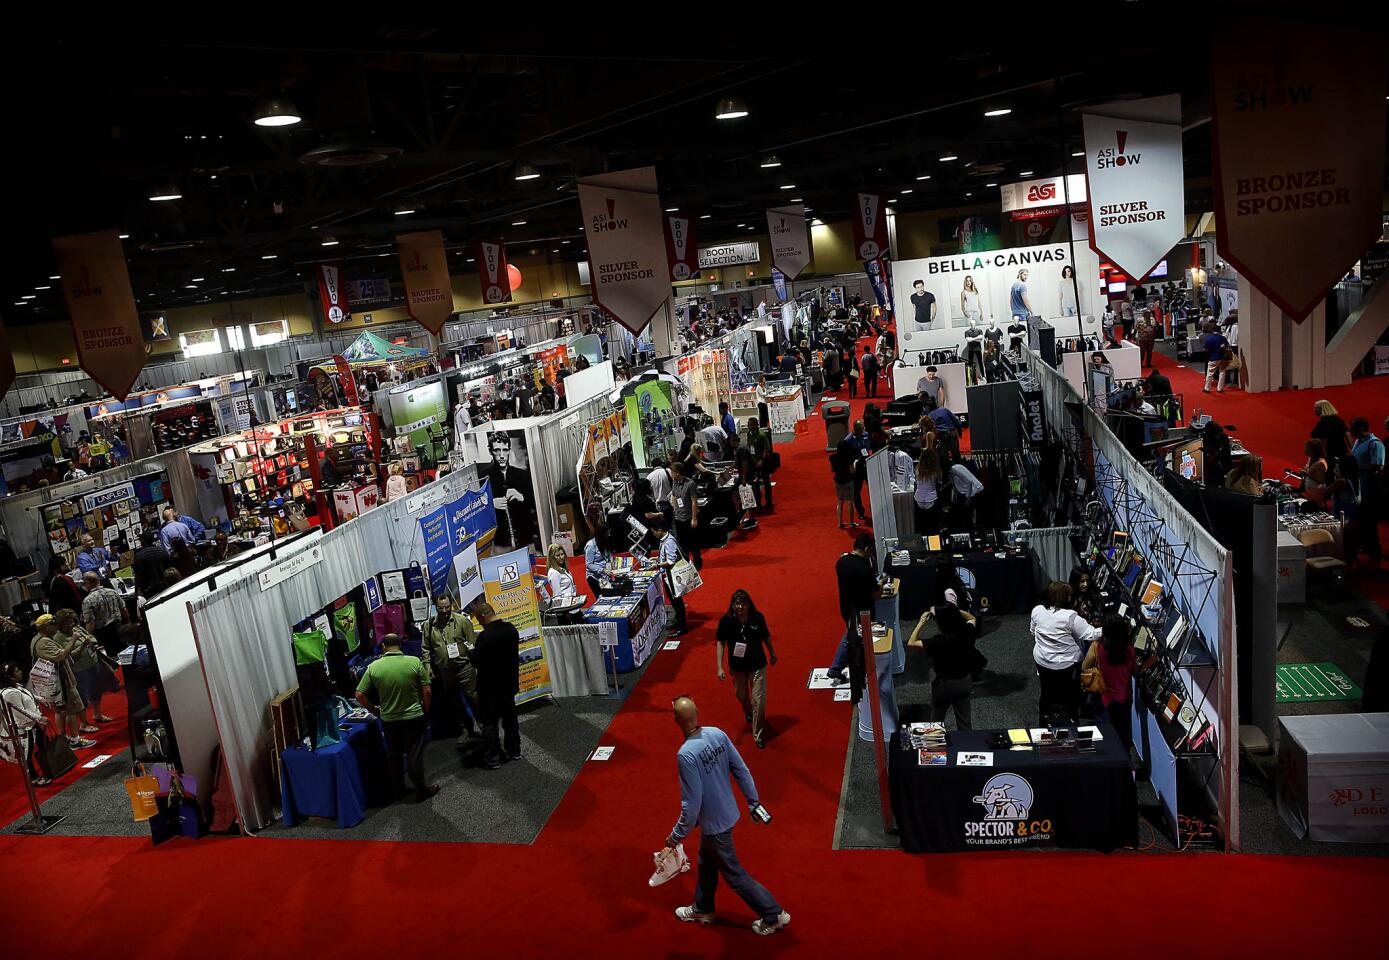 Free swag draws conventioners